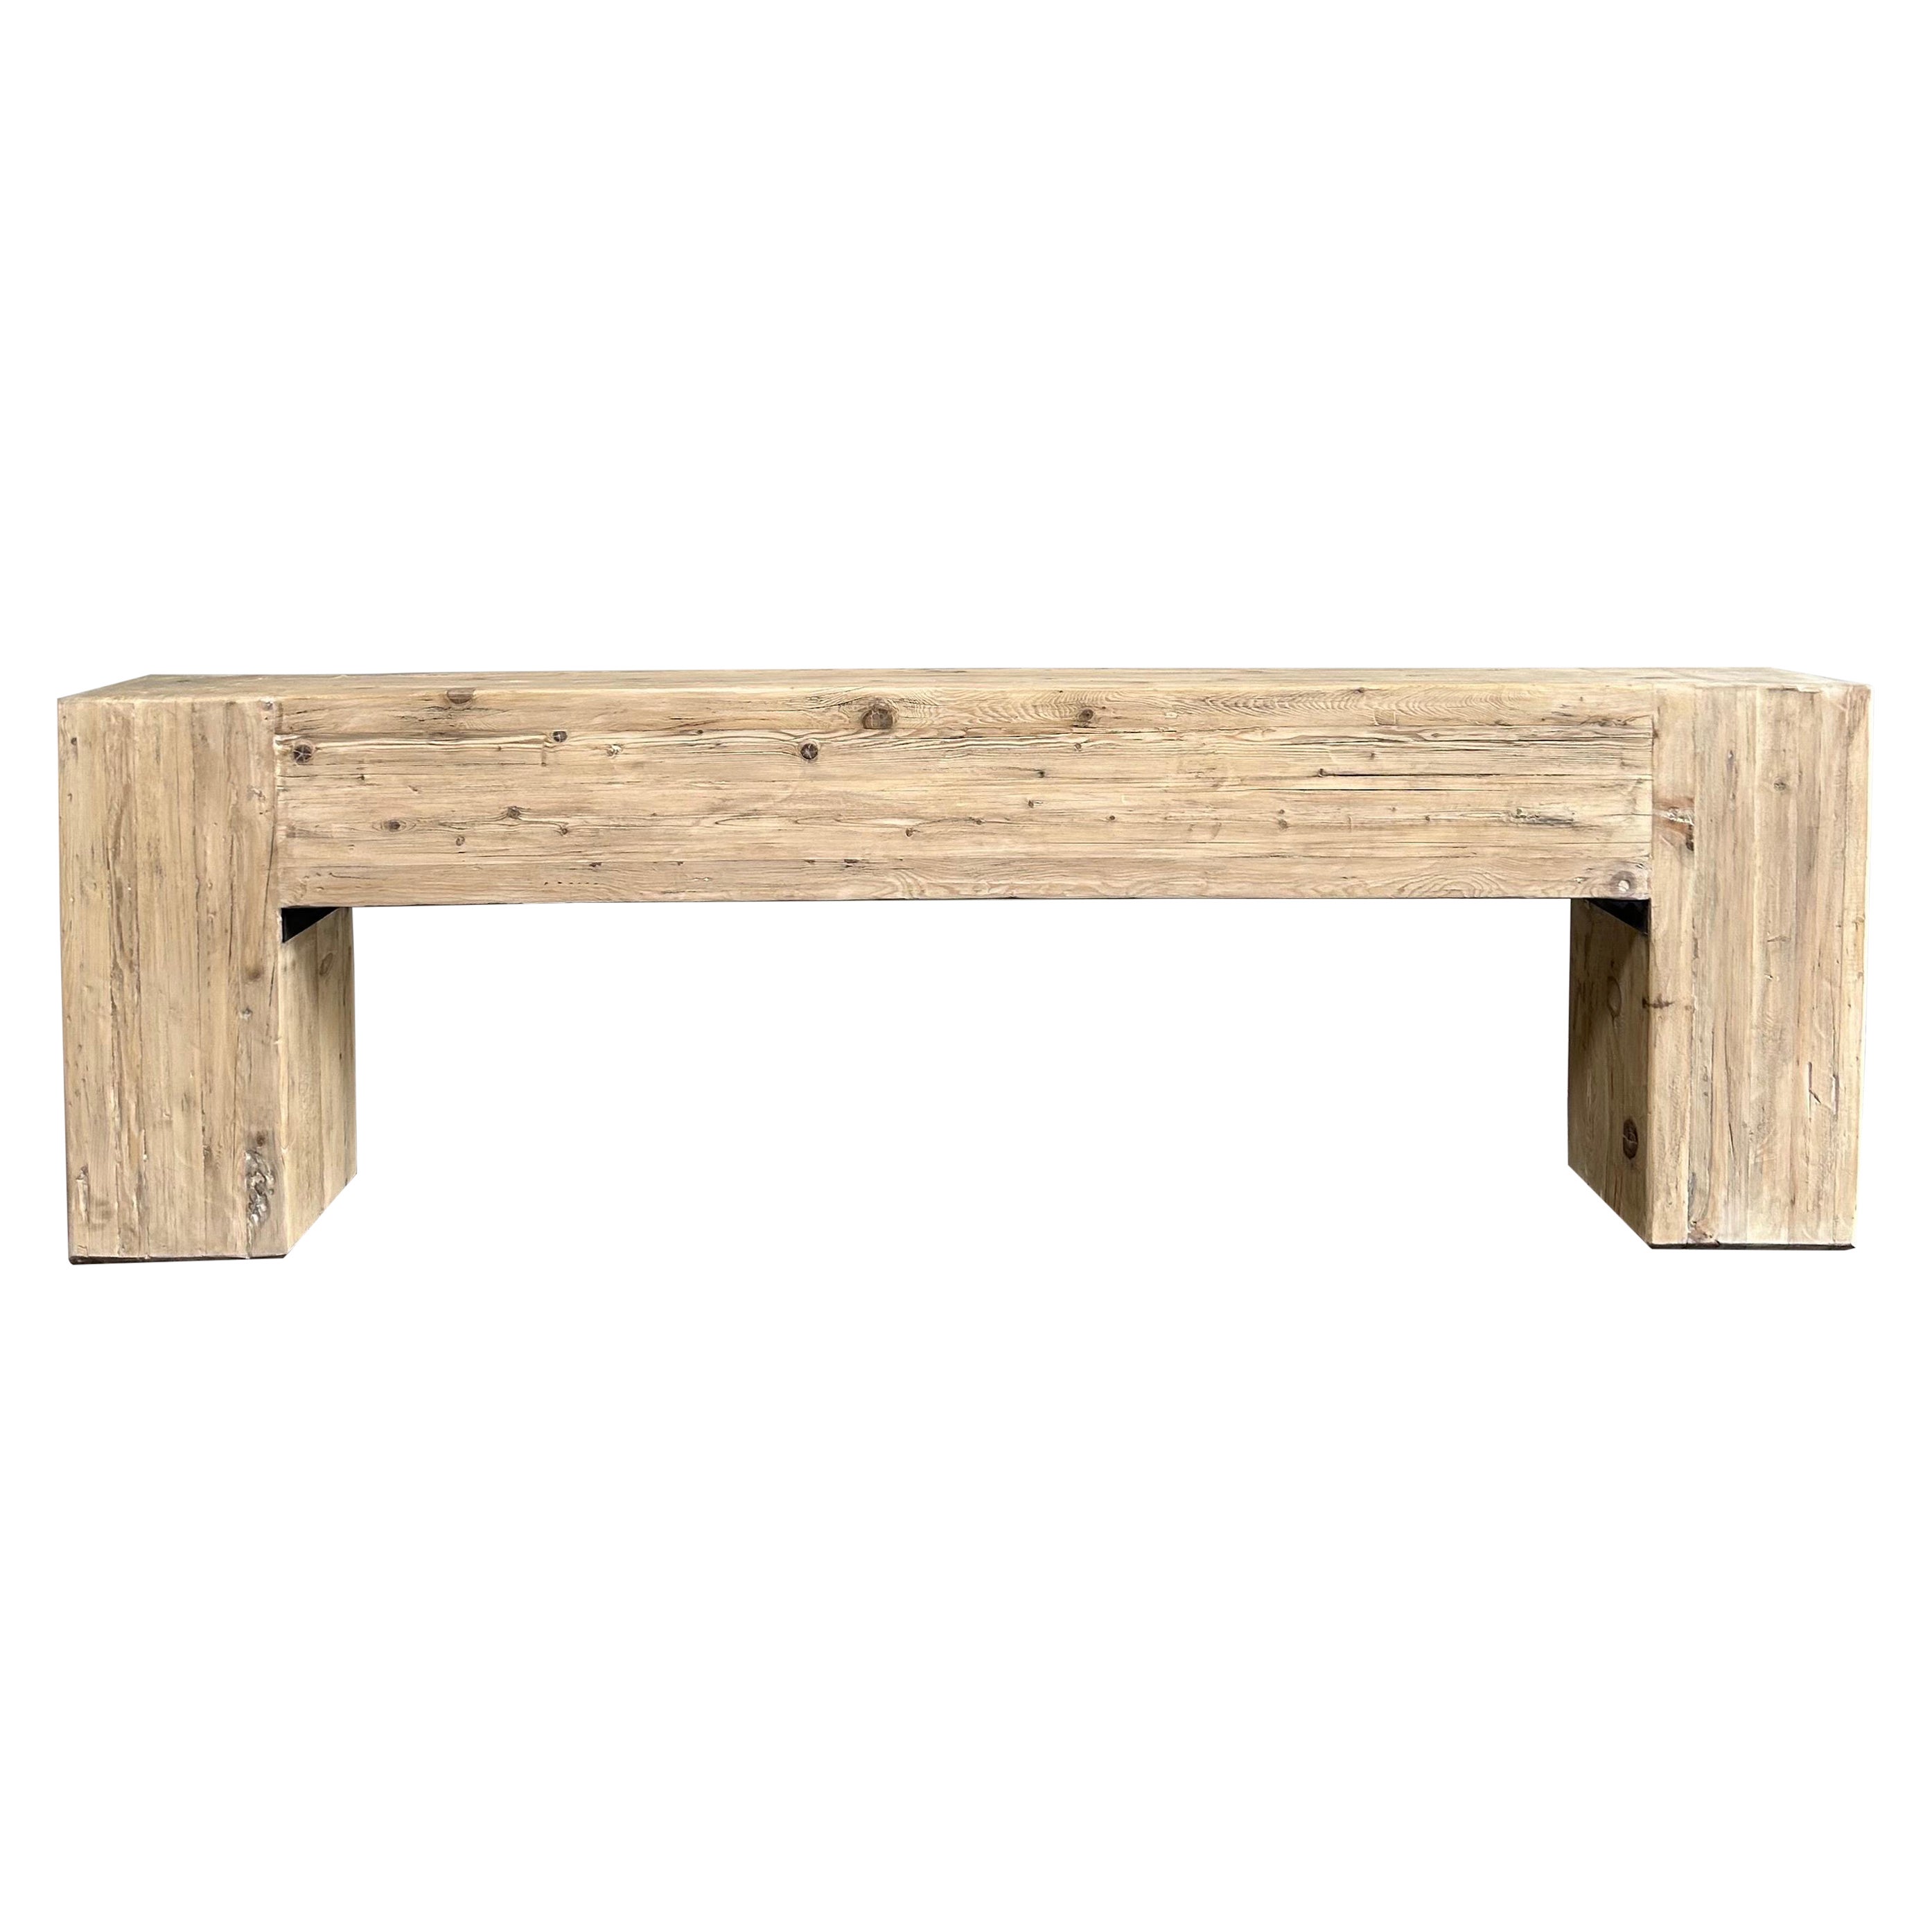 Reclaimed Elm Wood Beam Style Console Table Large For Sale